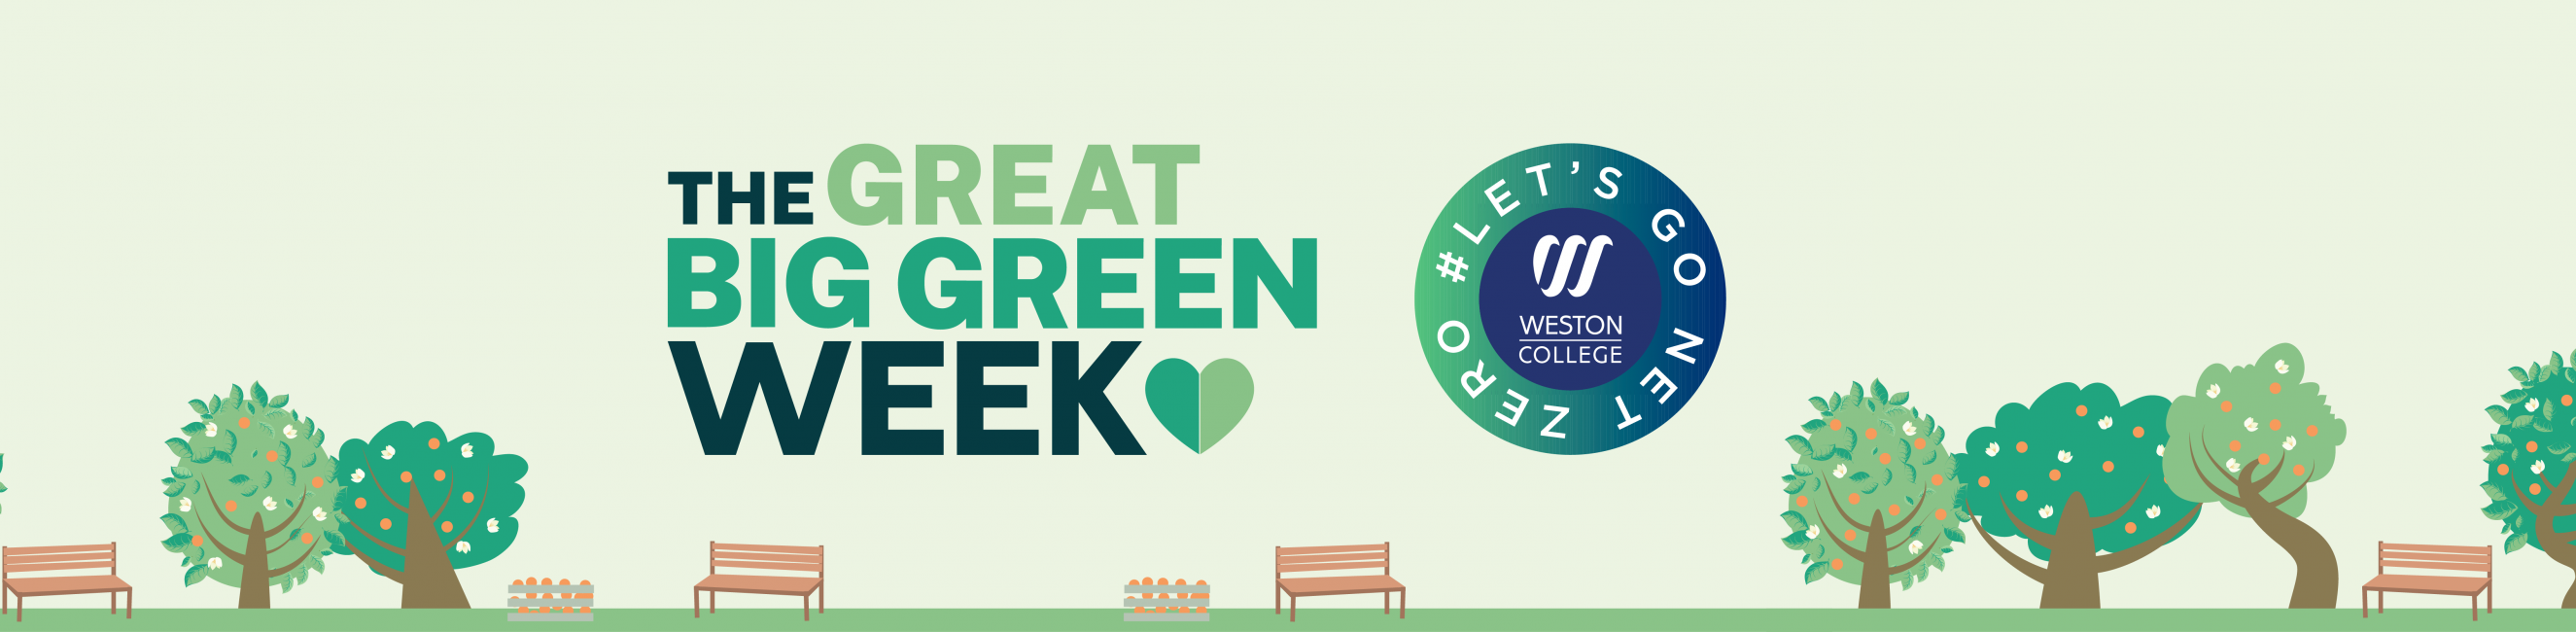 A graphic promoting the Great Big Green Week at Weston College